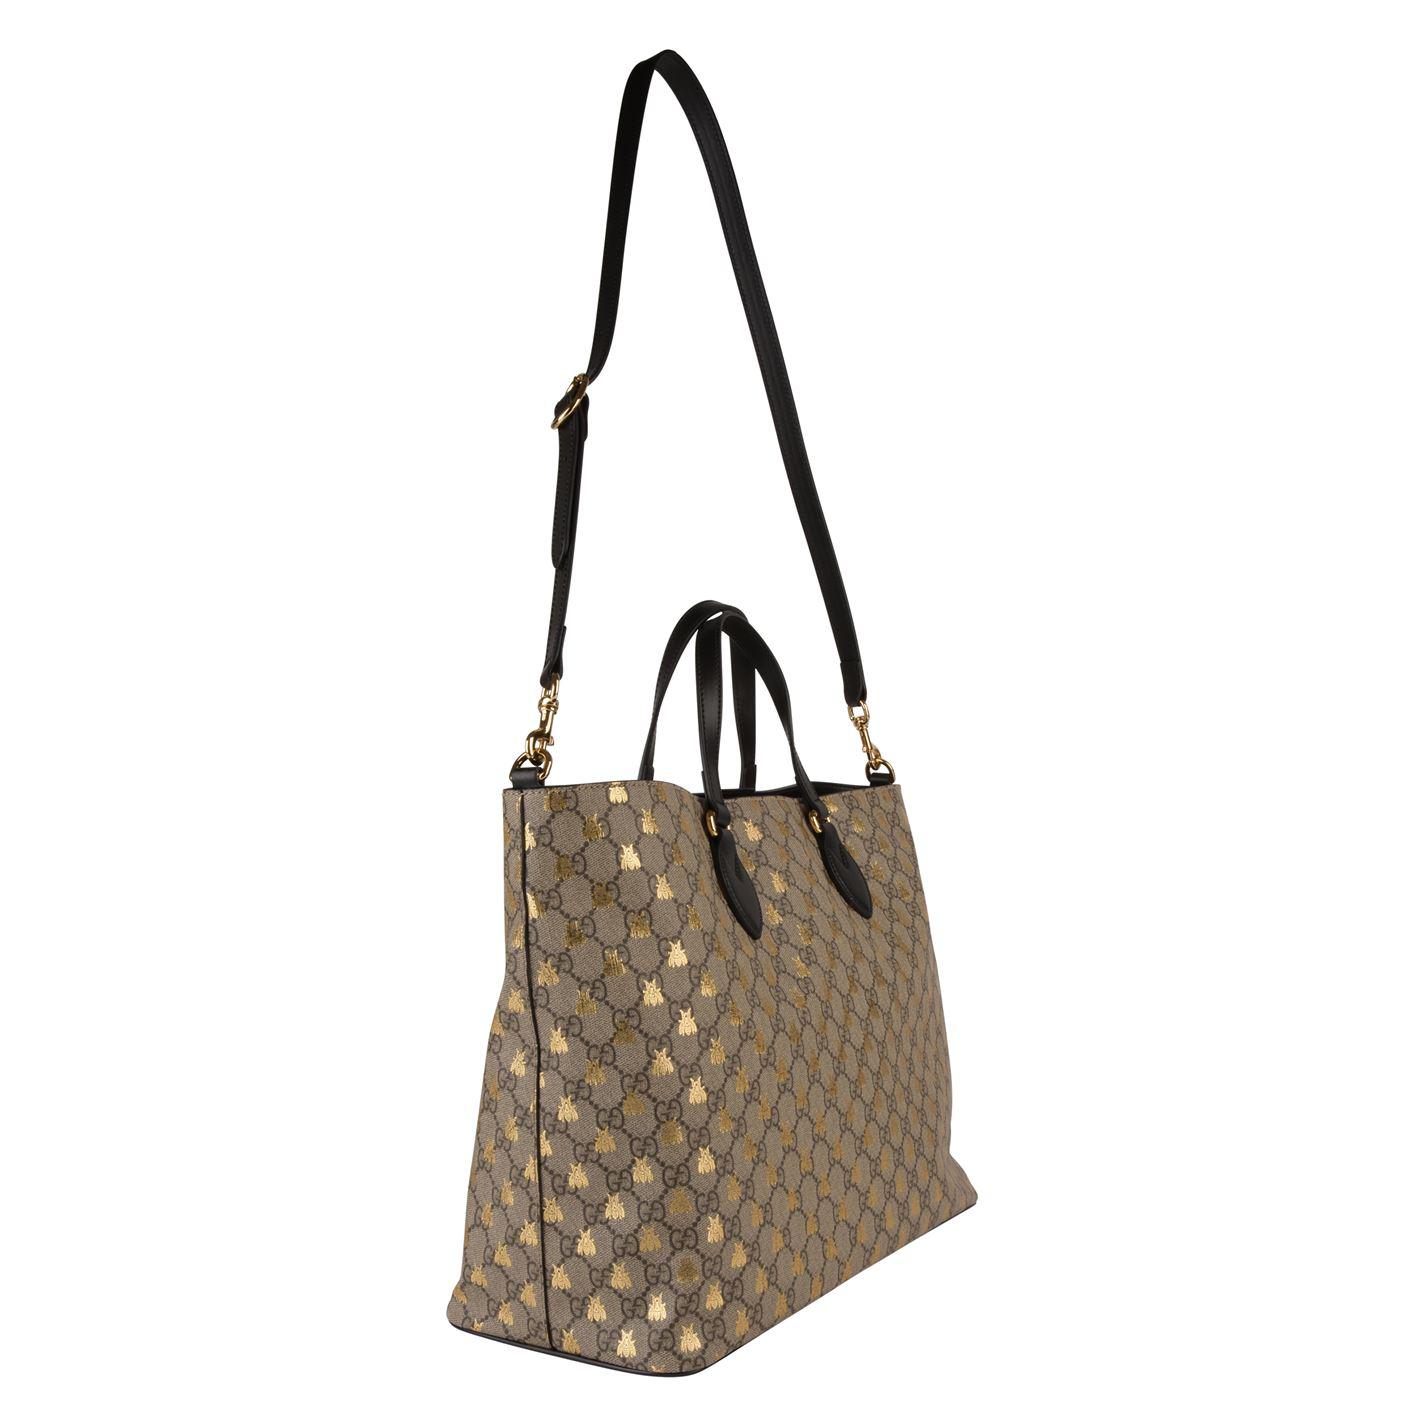 Gucci Gg Supreme Bee Tote Bag in Natural - Lyst